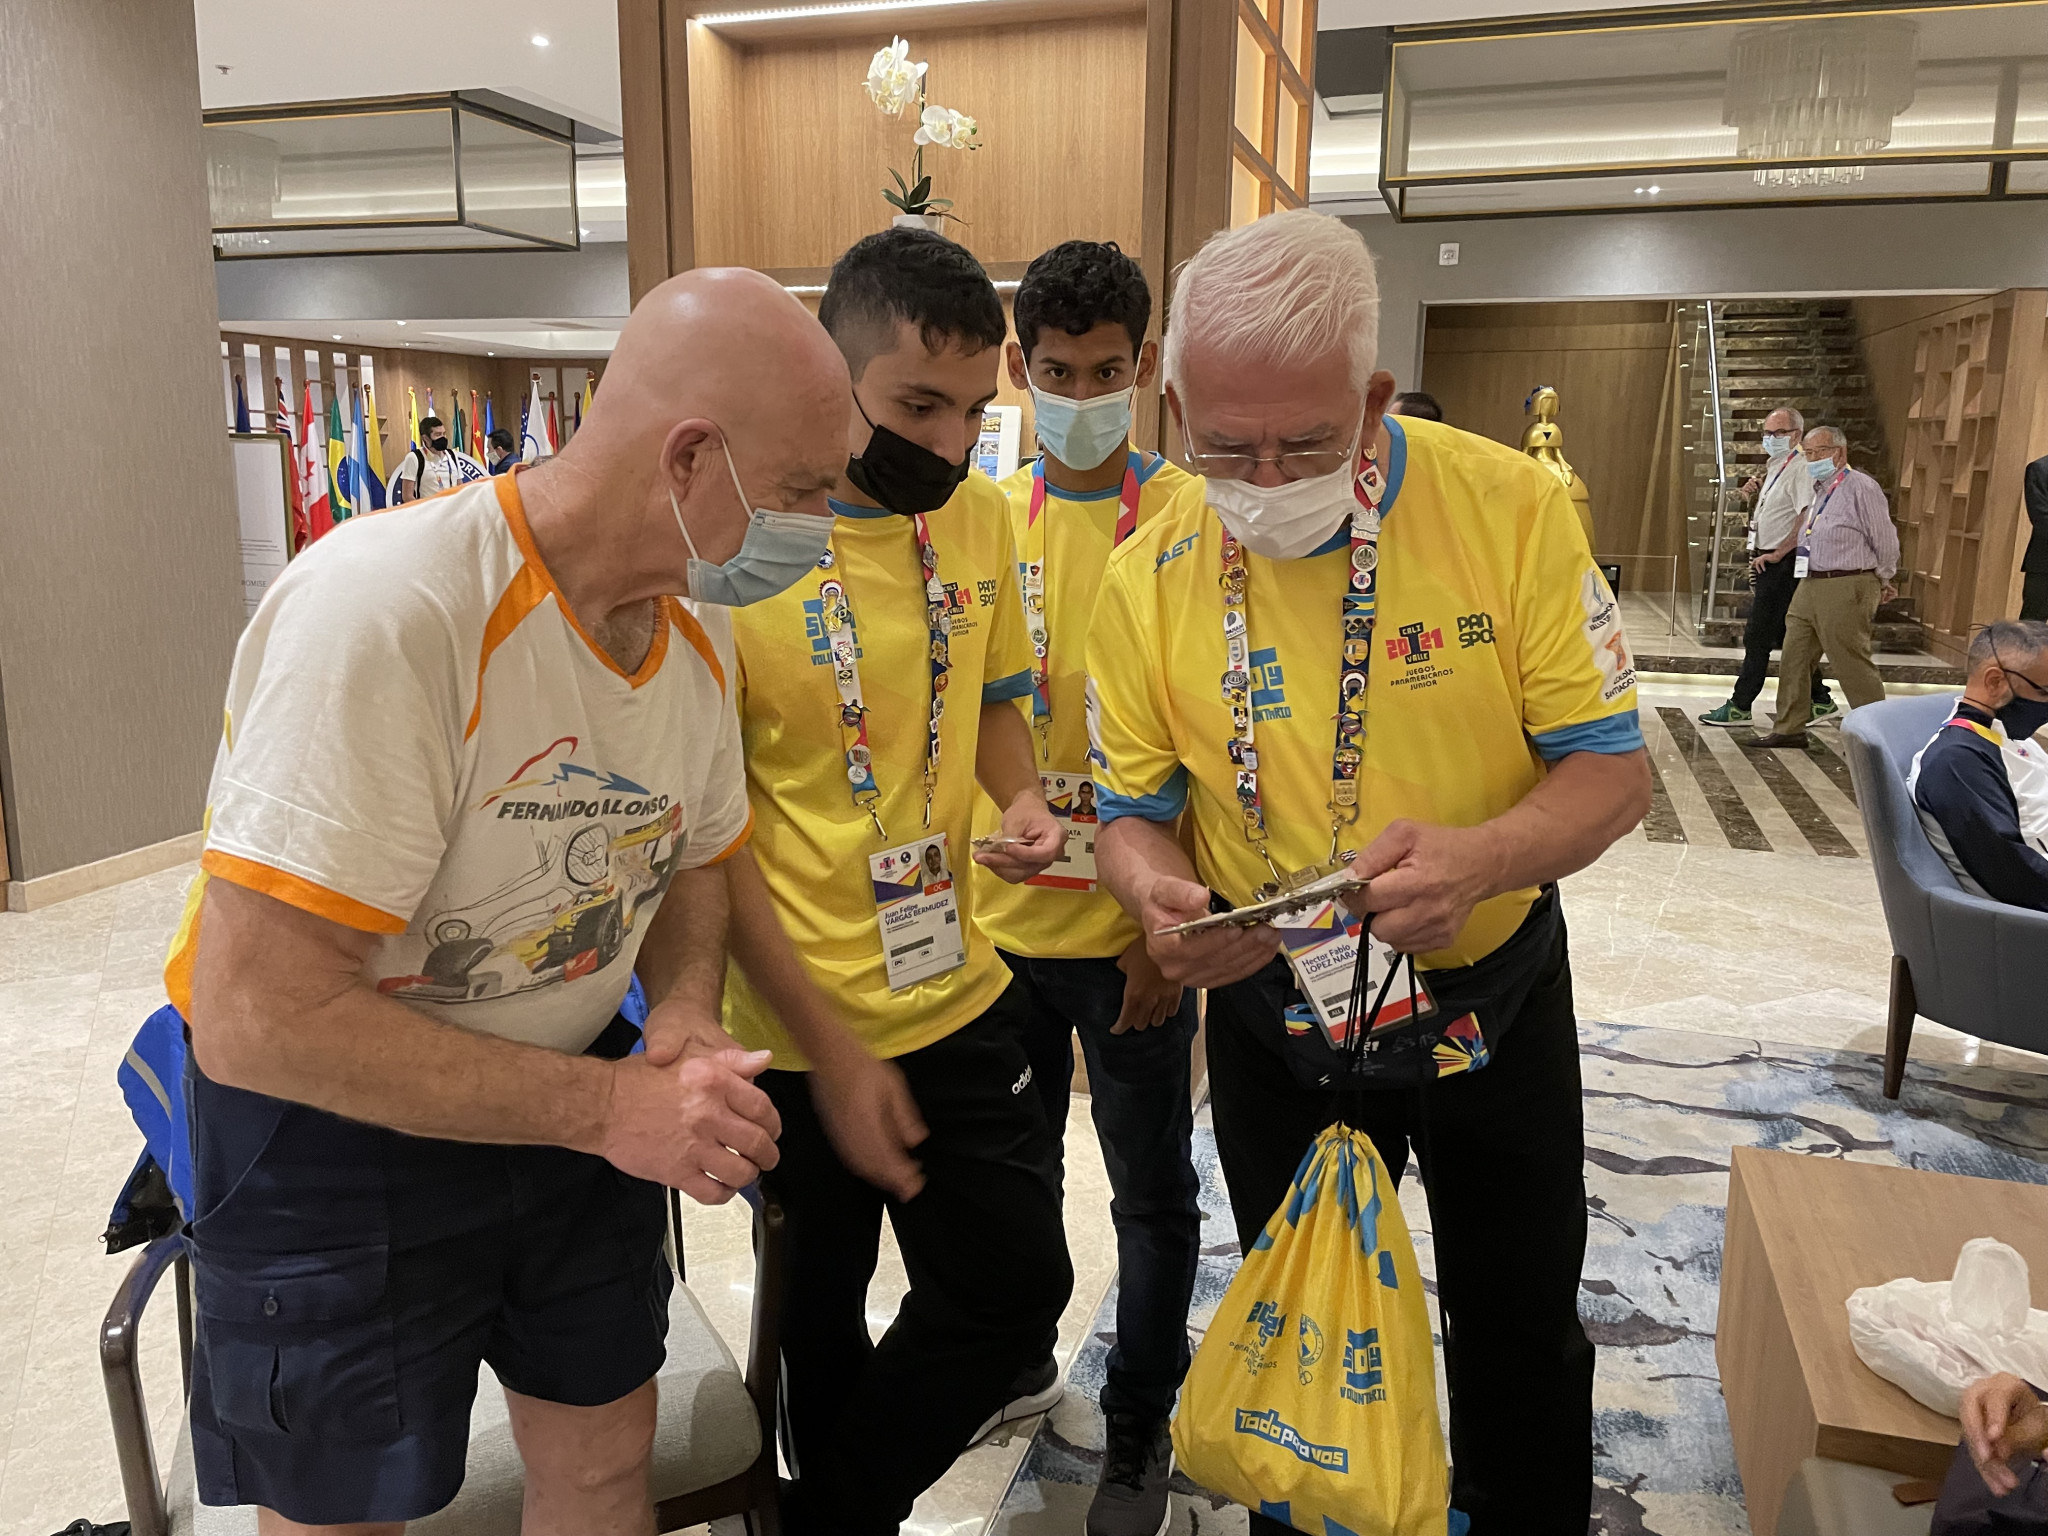 Pin collecting resumed as normal at the Junior Pan American Games in Cali ©ITG